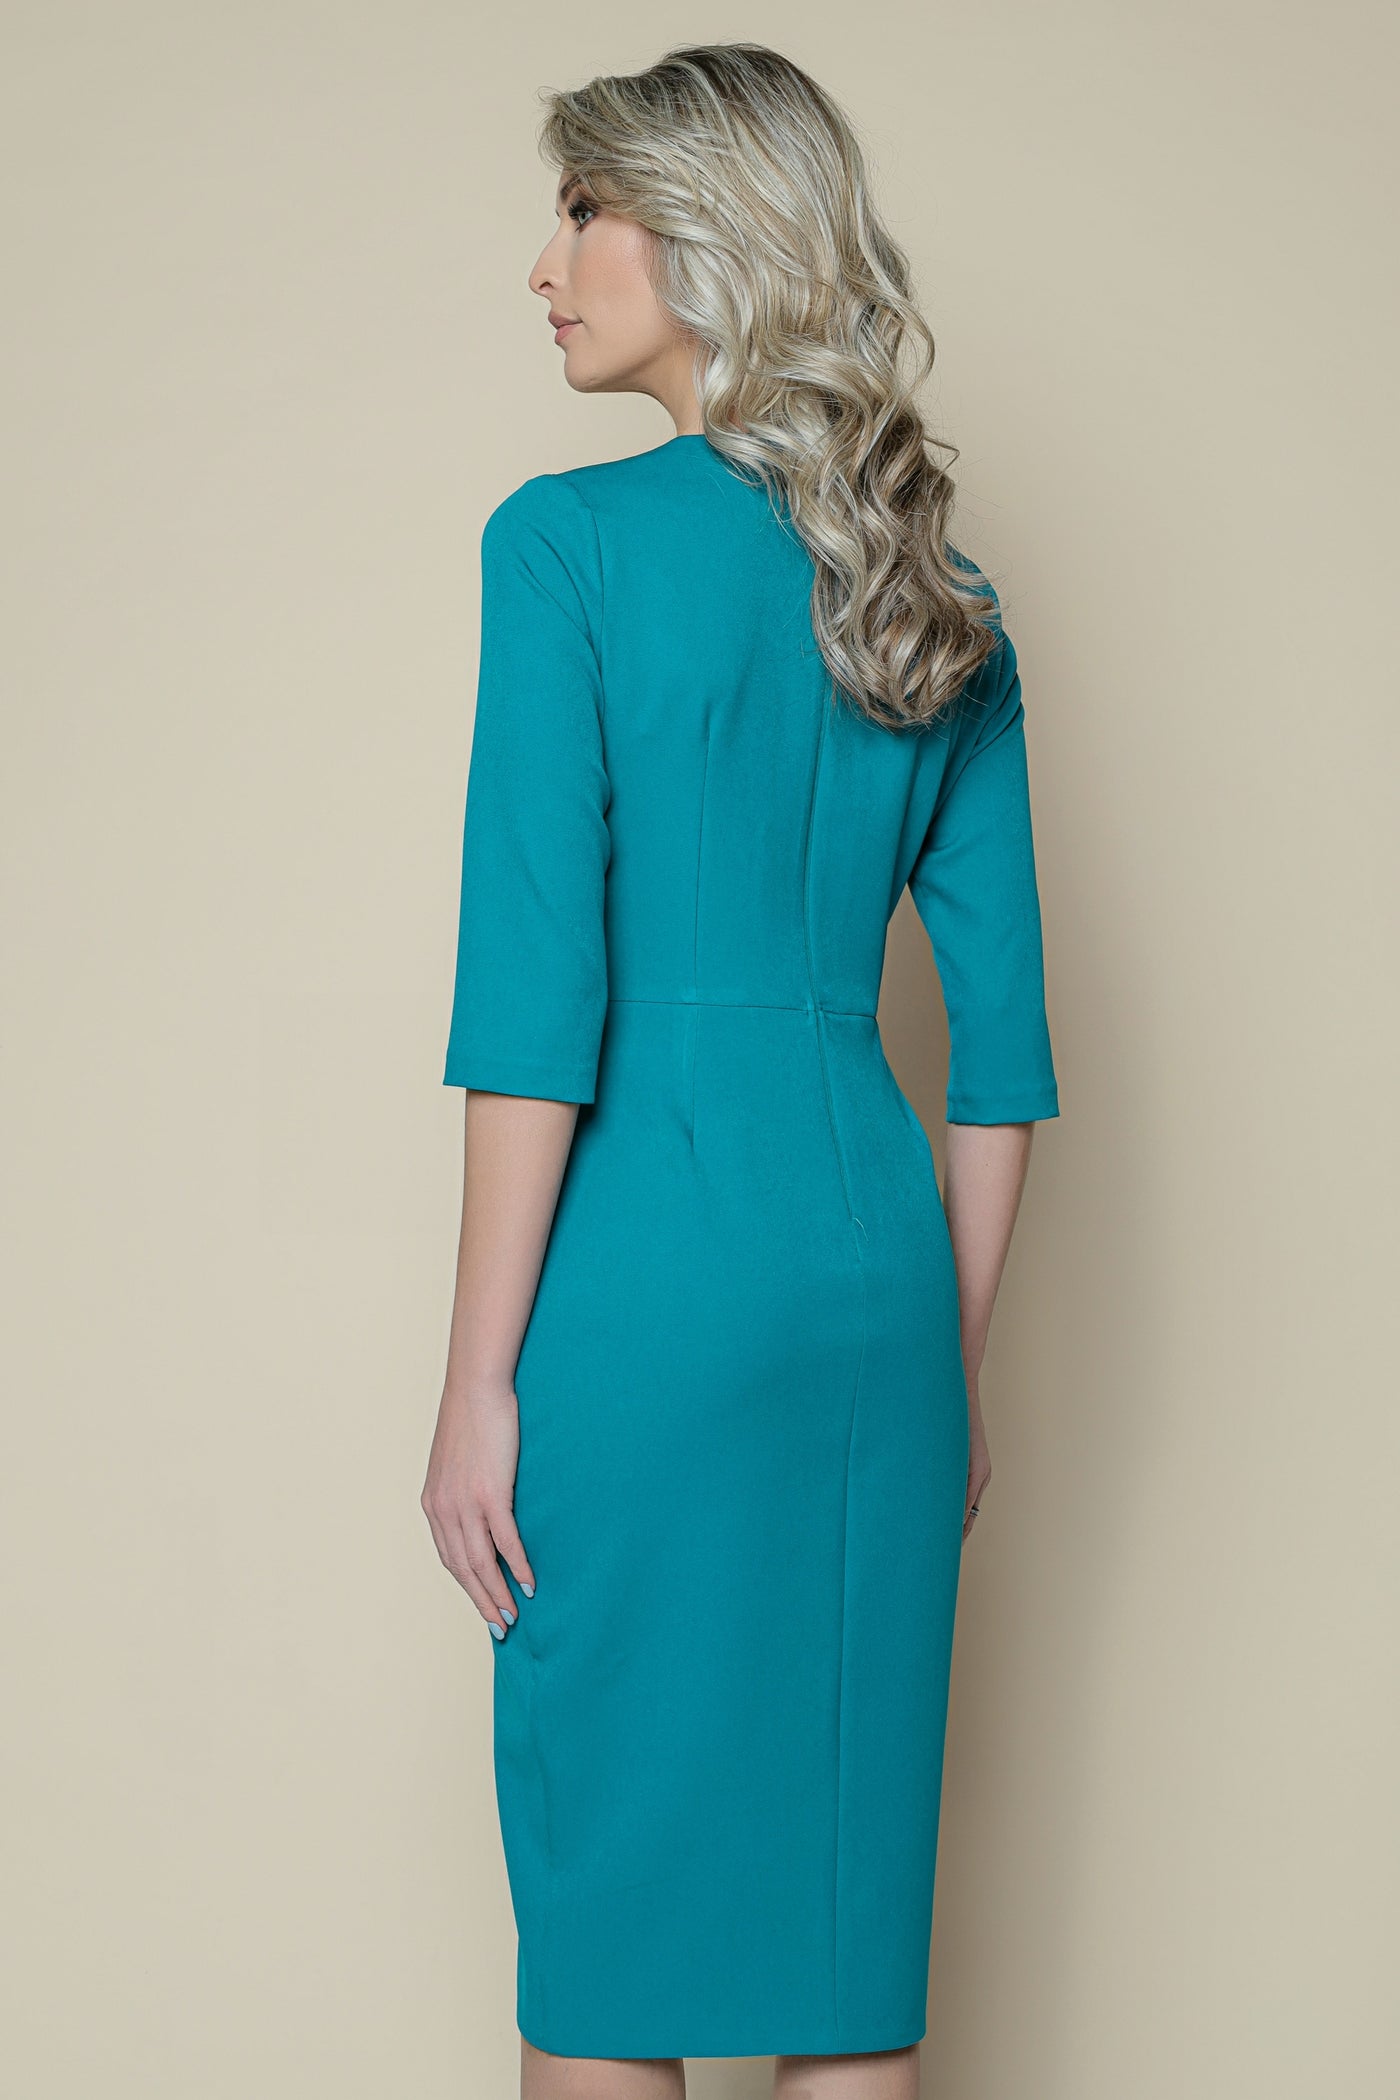 Rochie MBG turquoise cu fald si lant in lateral